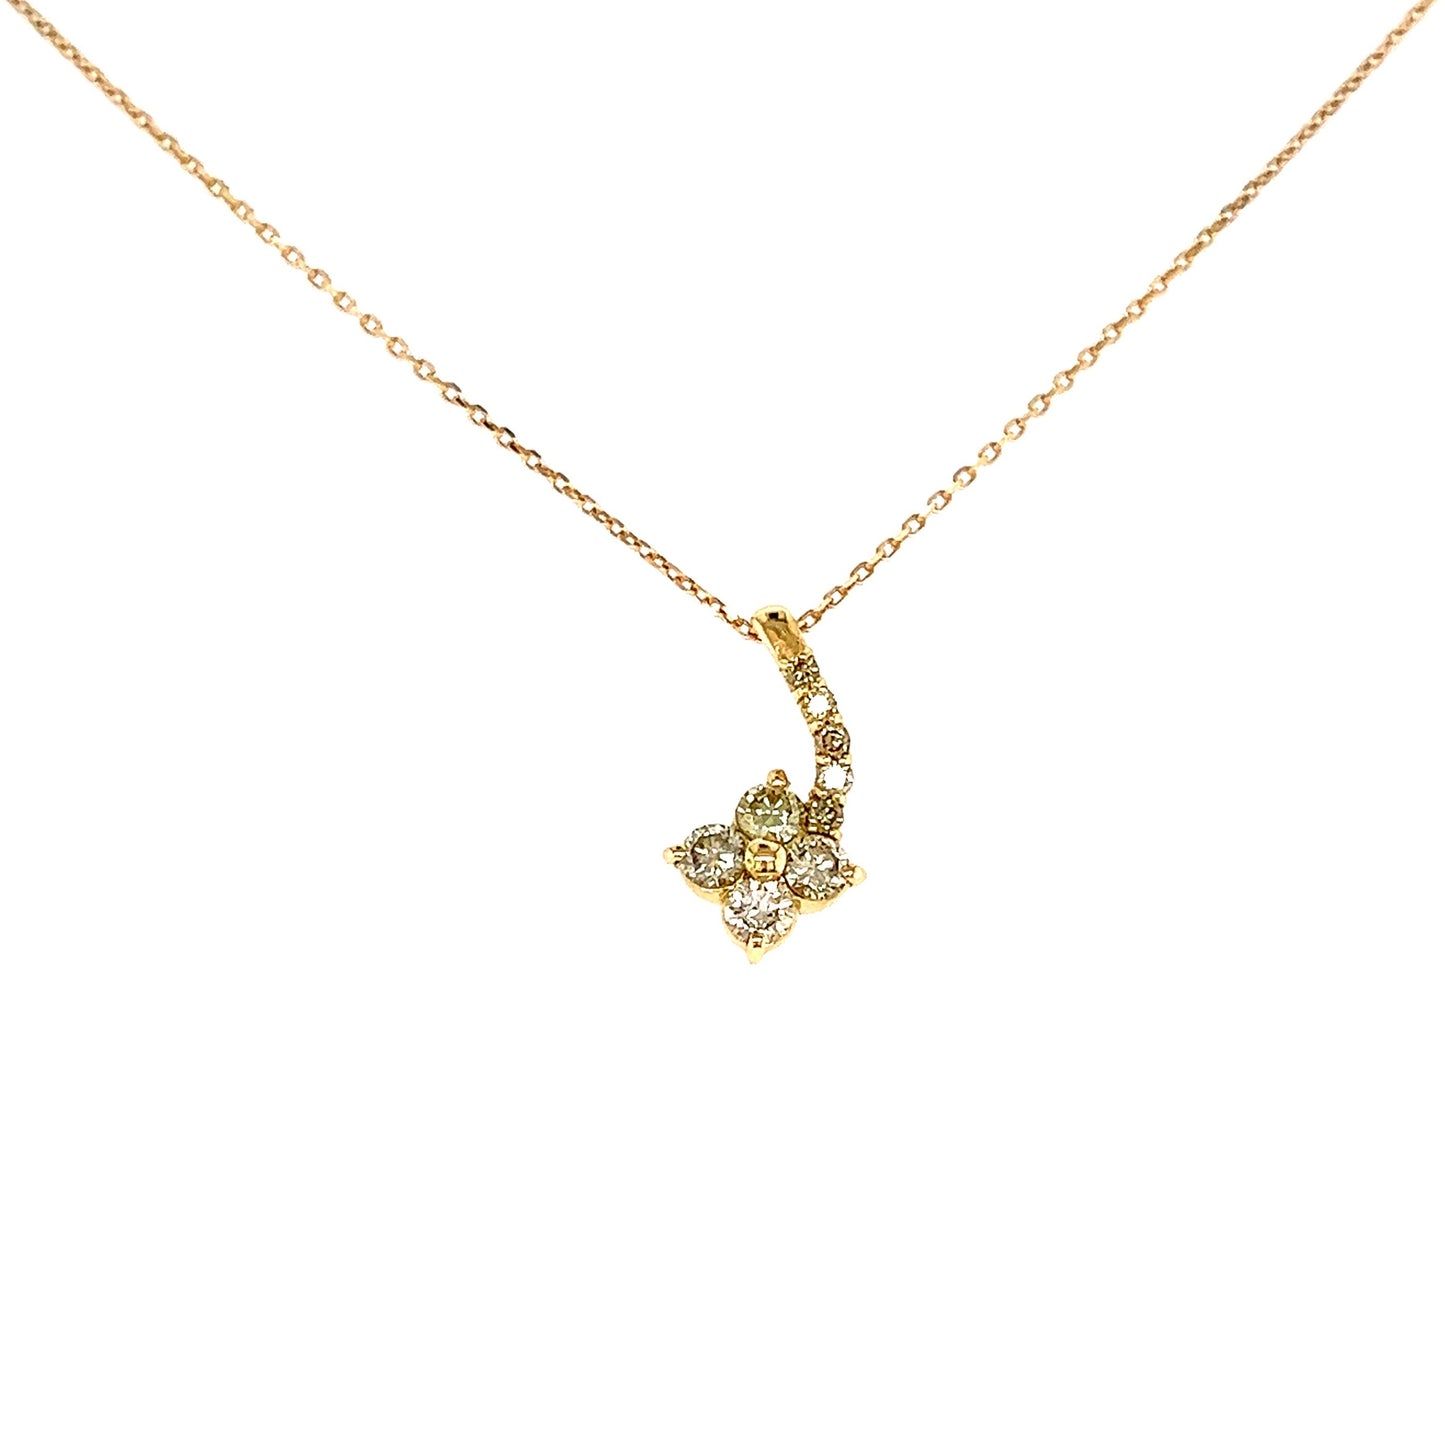 Yellow Dia Meteor Star Necklace
0.2/0.04ct